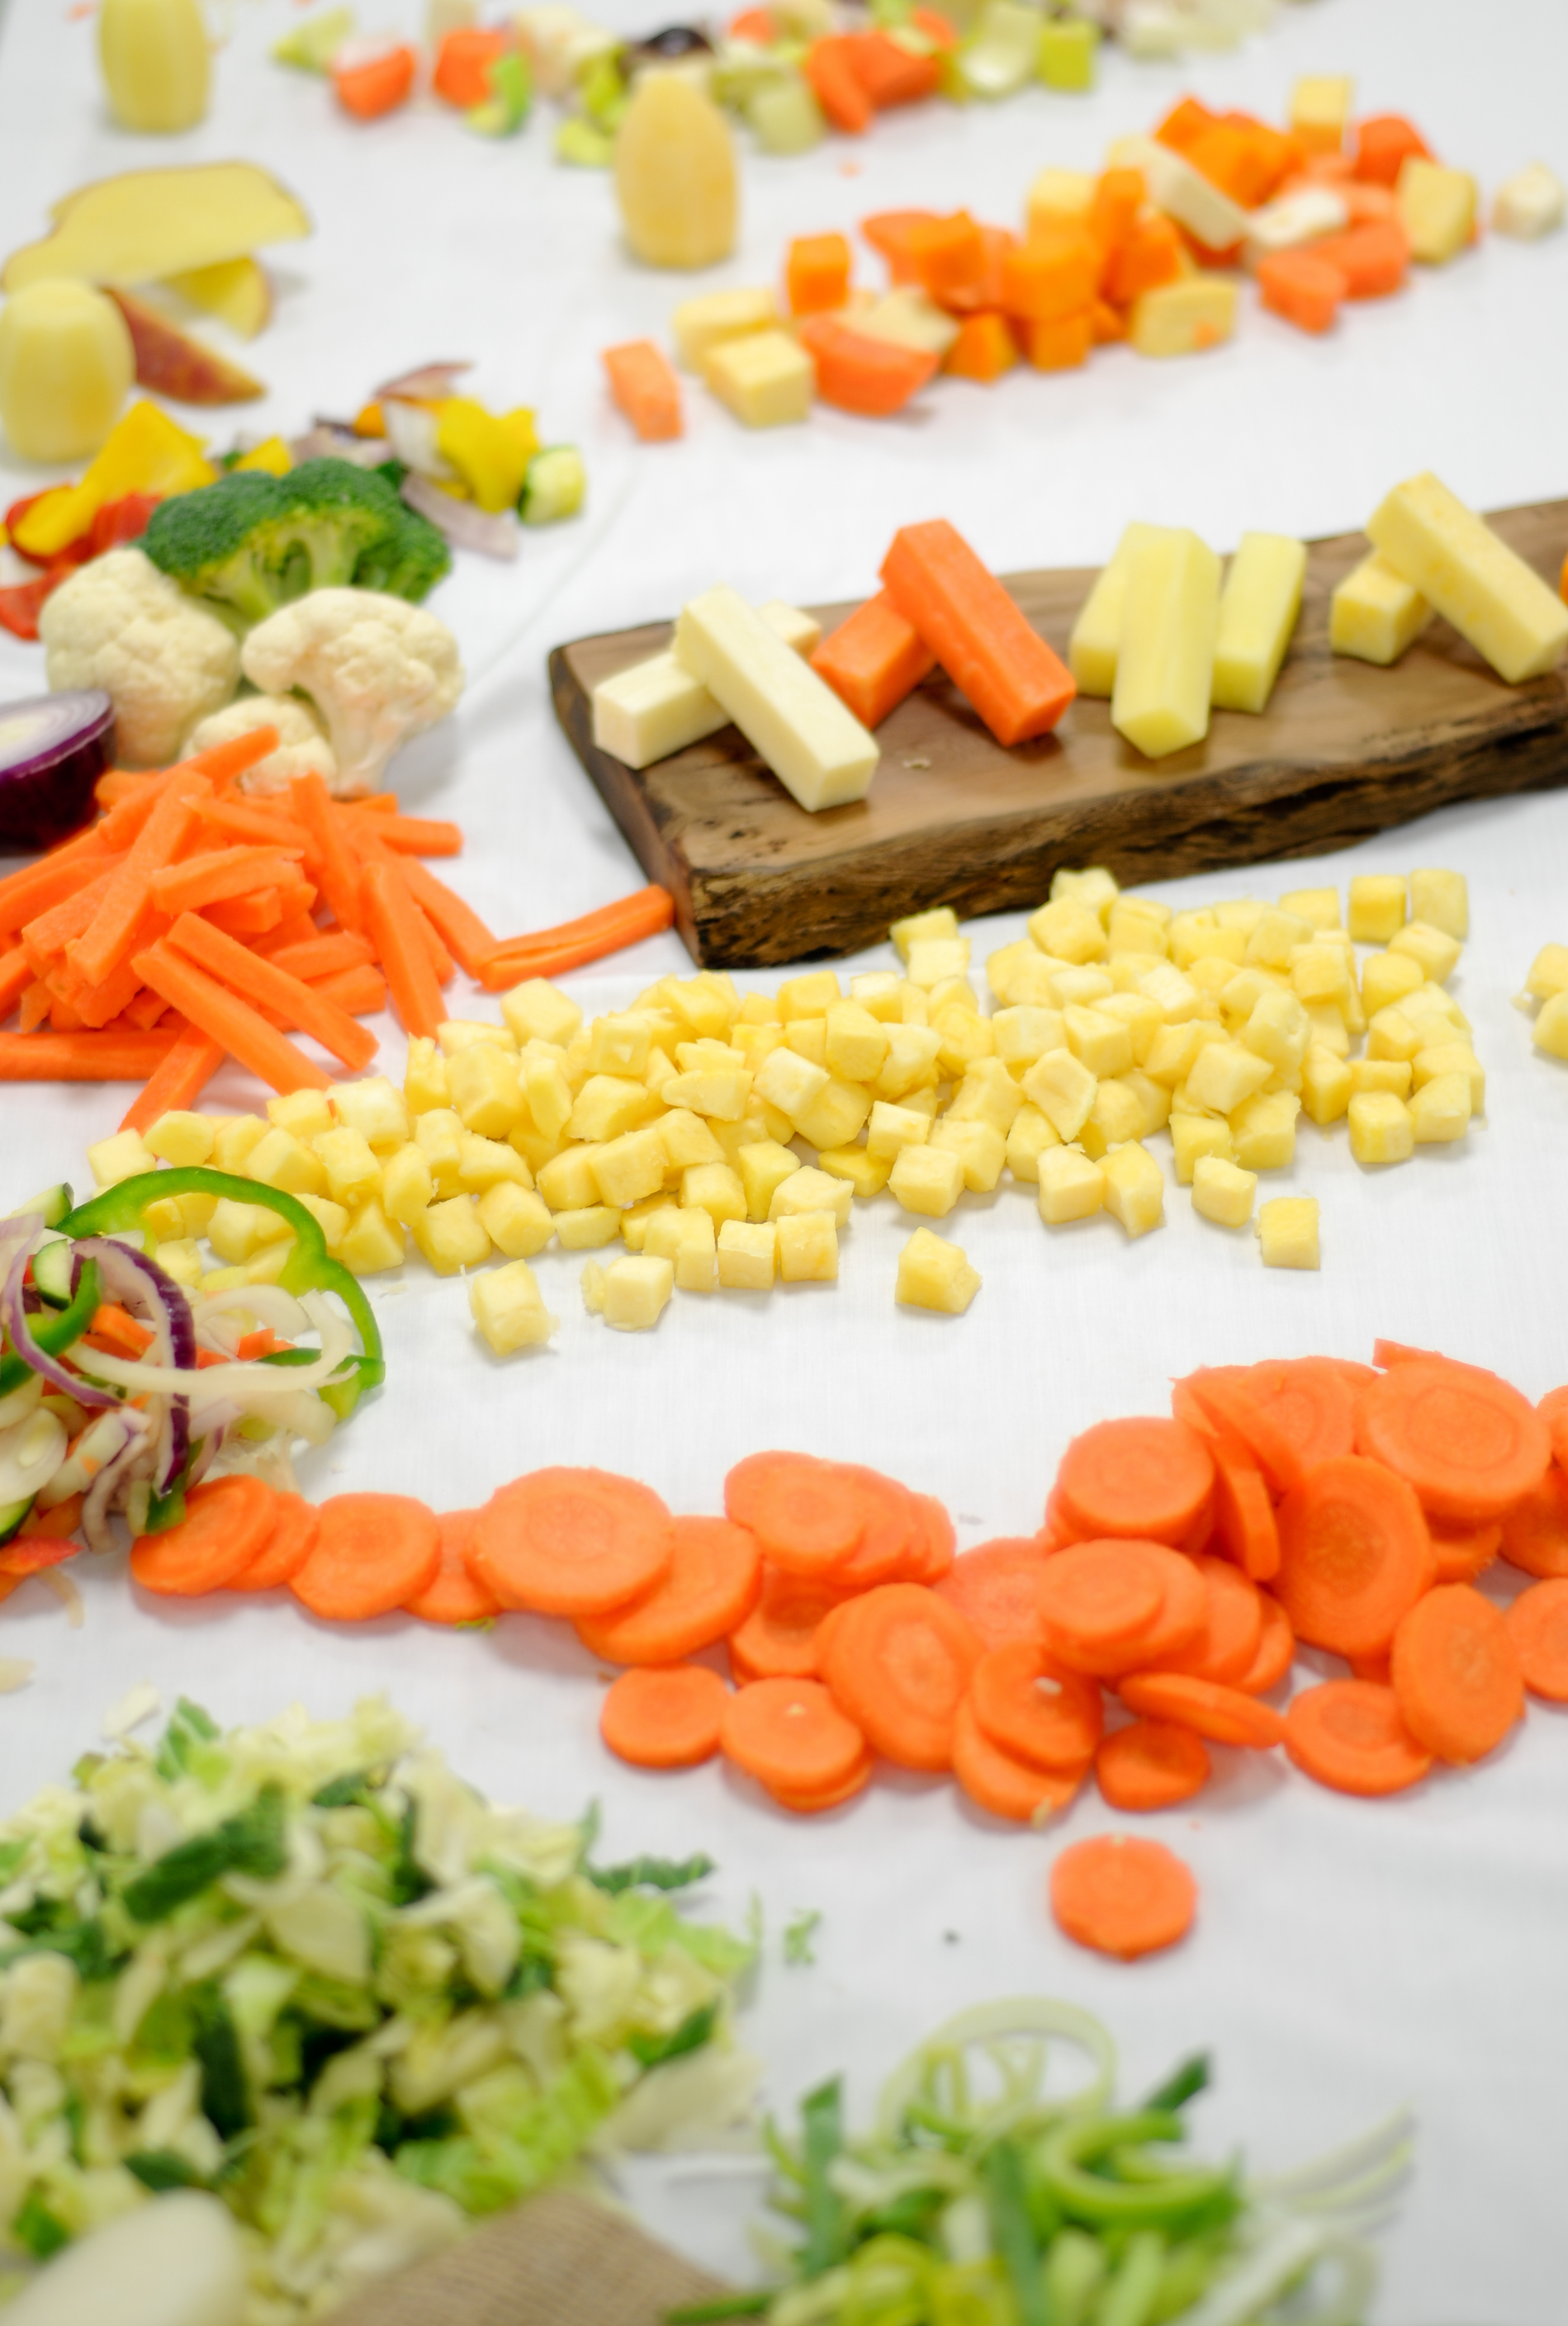 Prepared Vegetables on a table